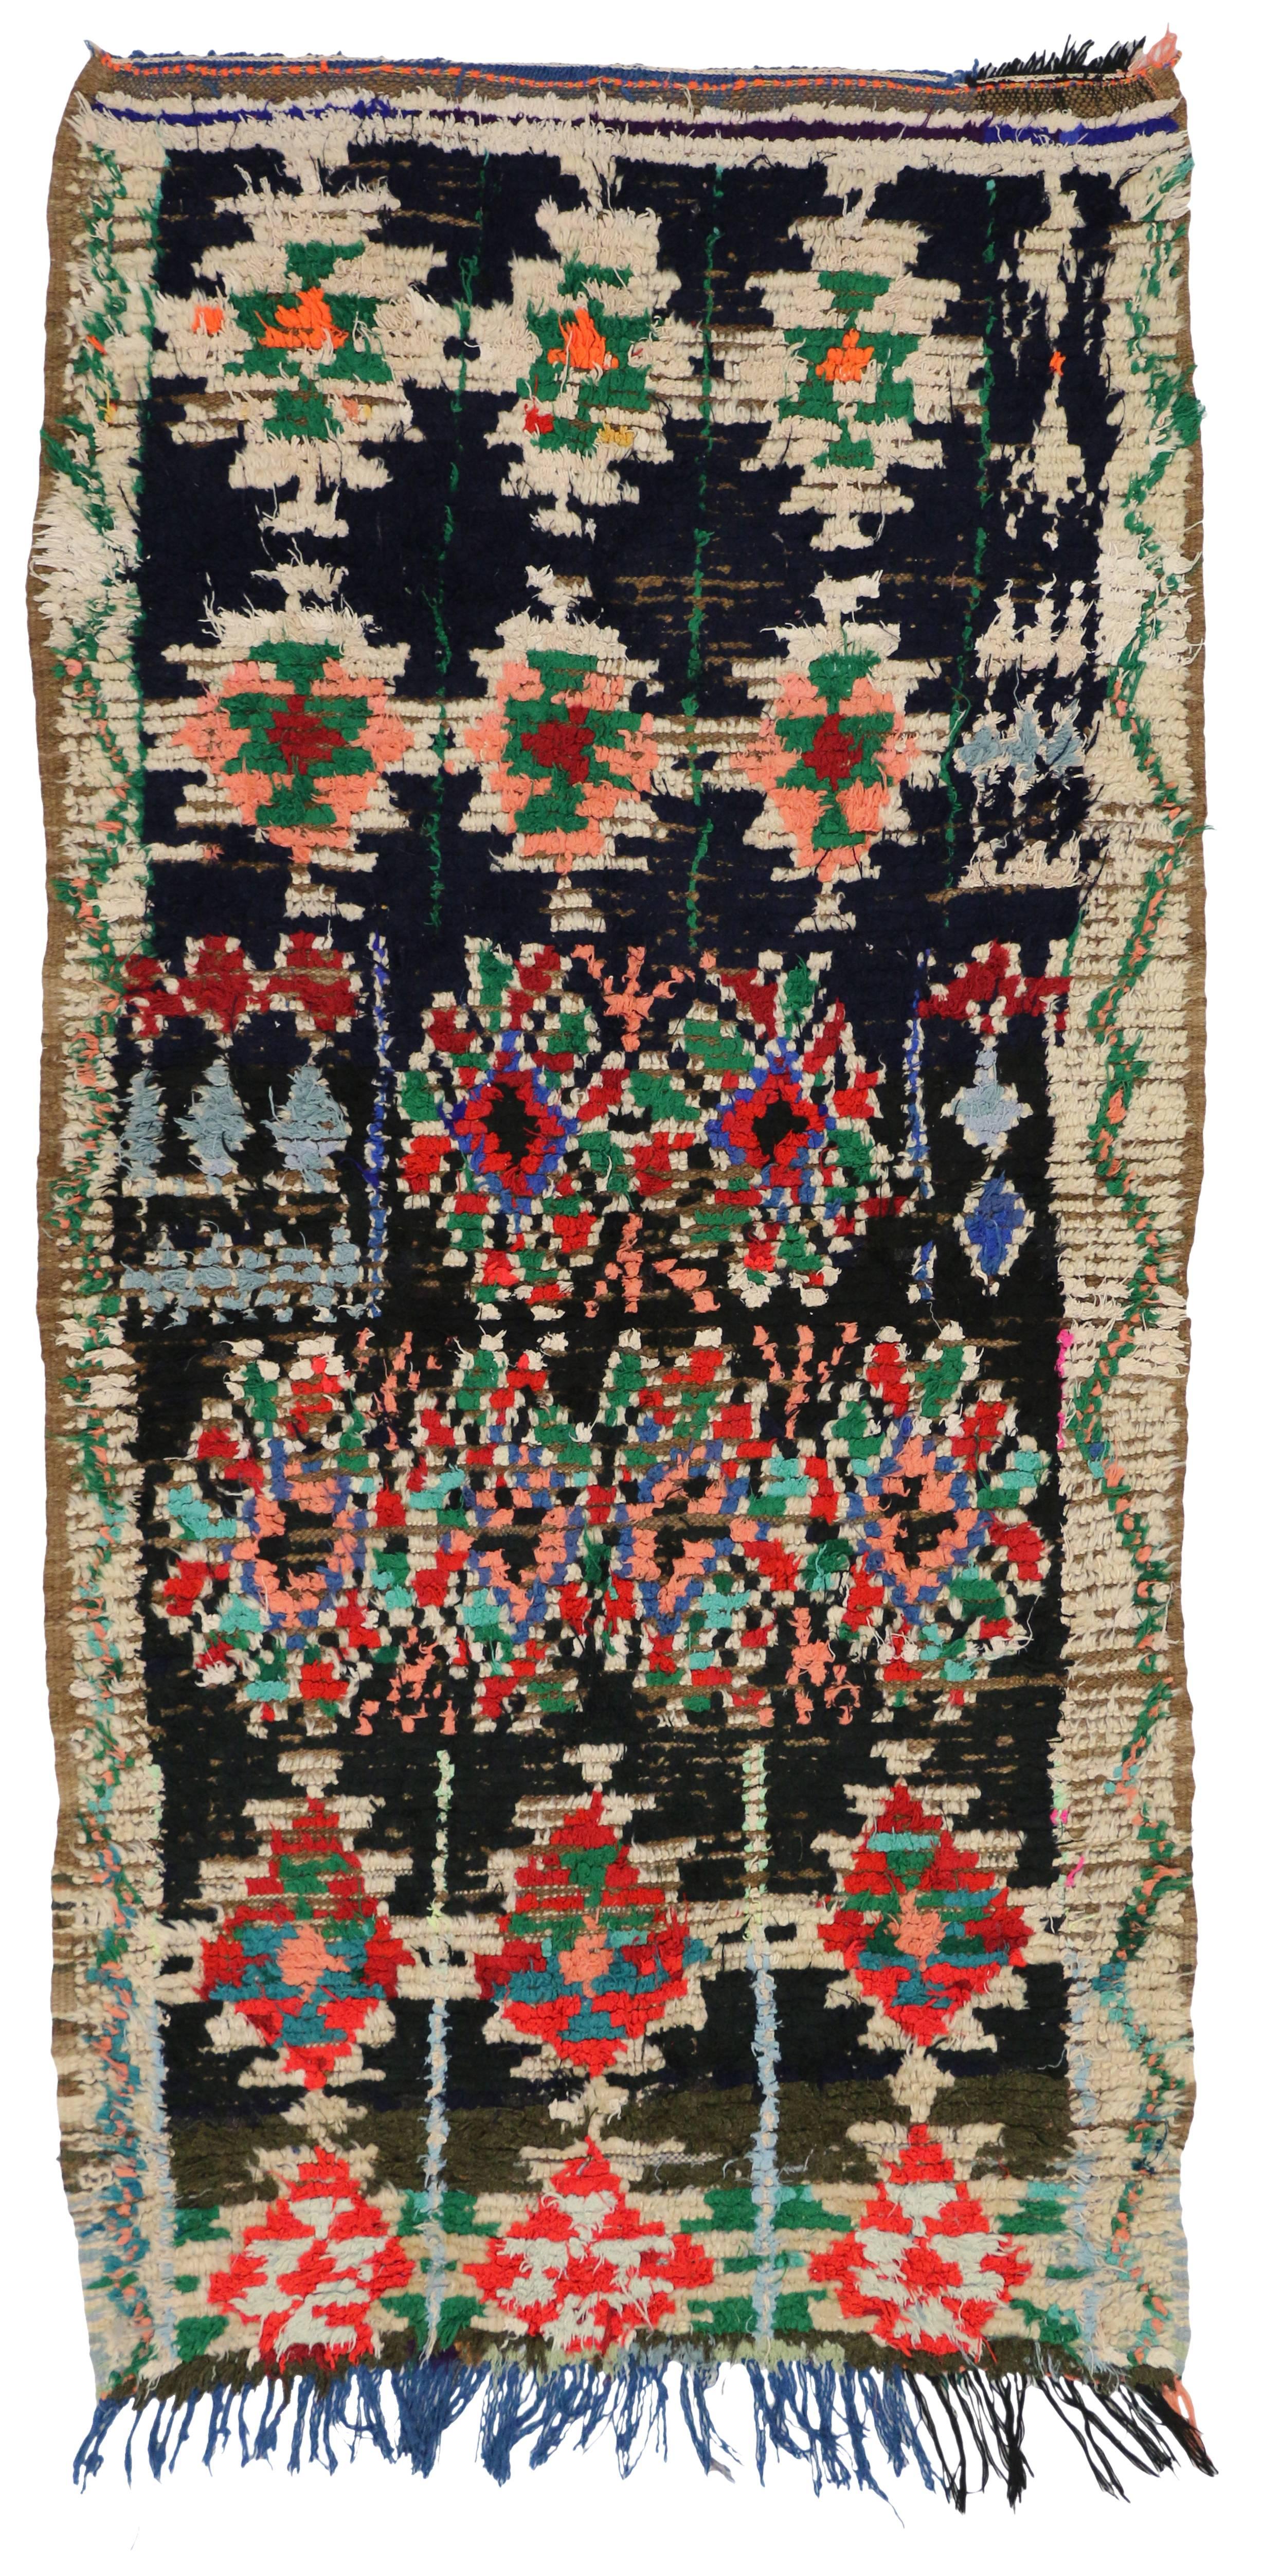 20th Century Vintage Berber Moroccan Boucherouite Rug with Tribal Style and Memphis Design